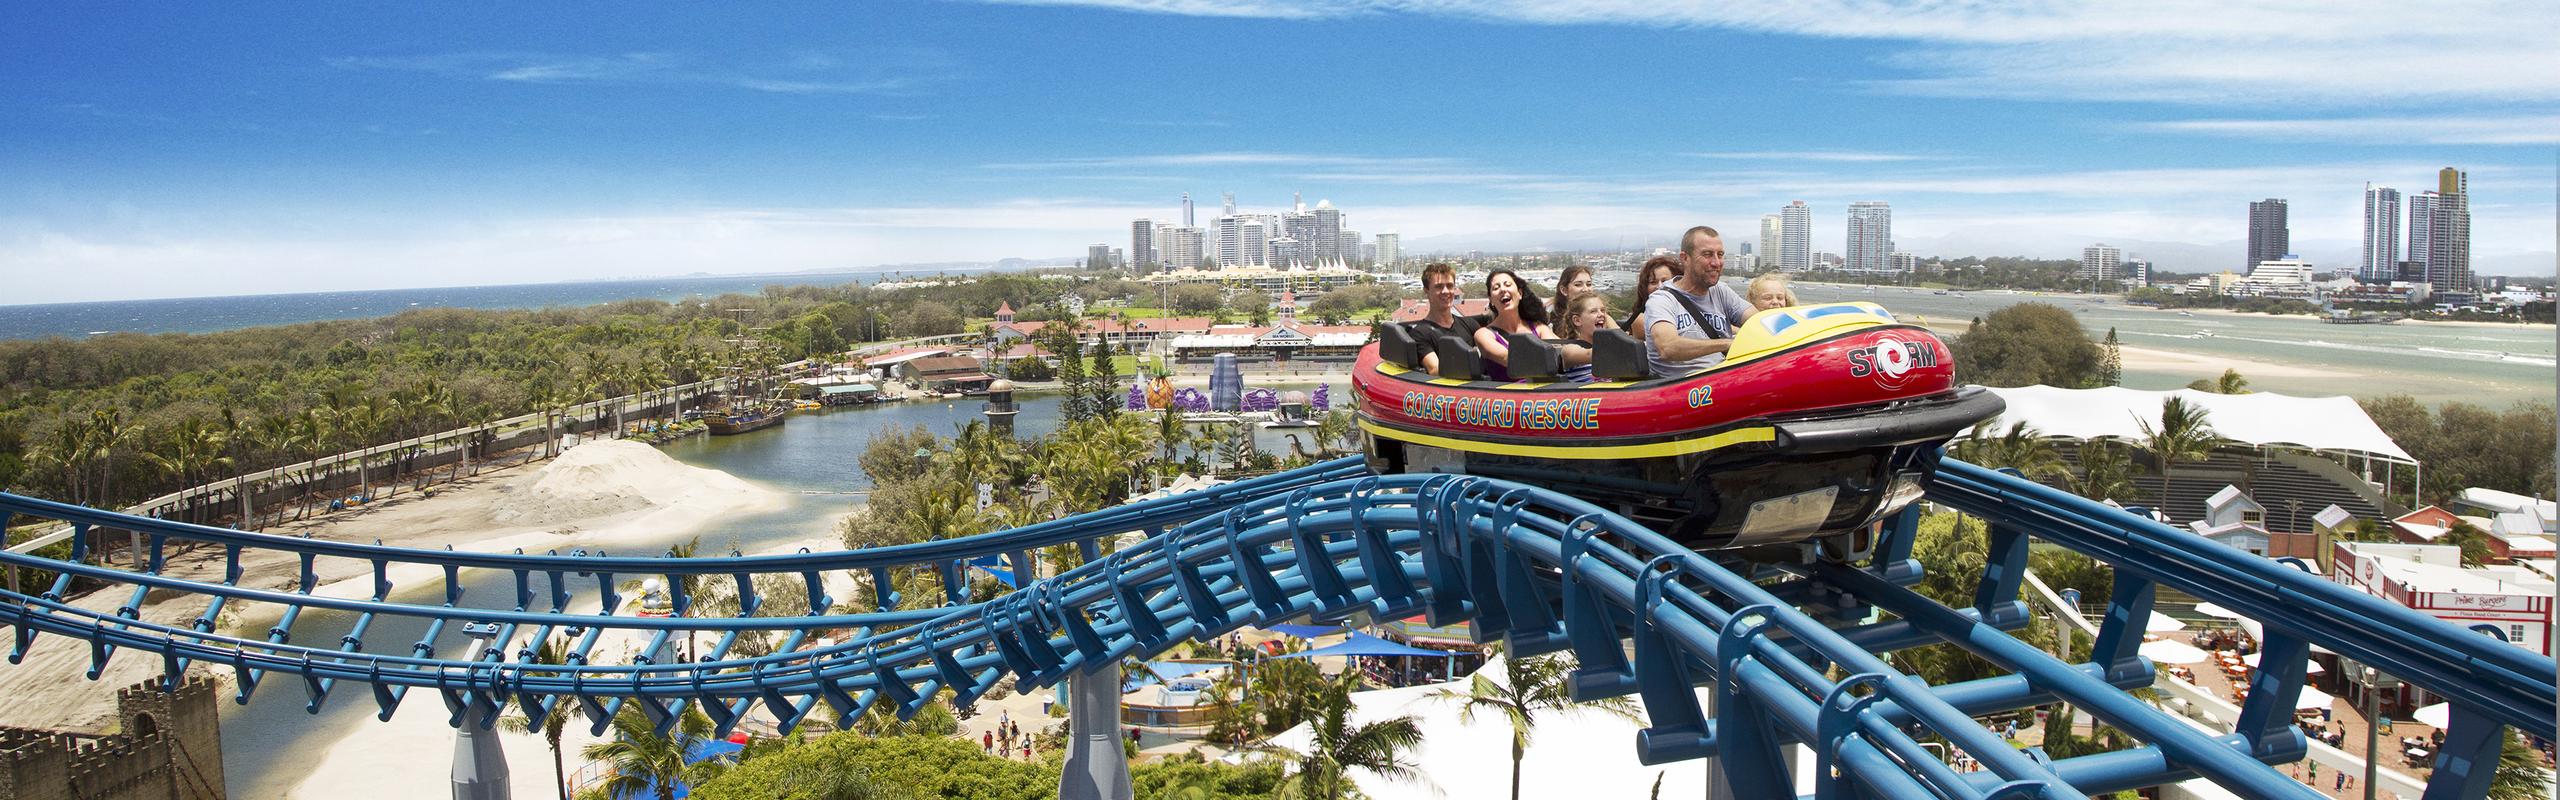 Gold Coast theme parks and attractions - Tourism Australia